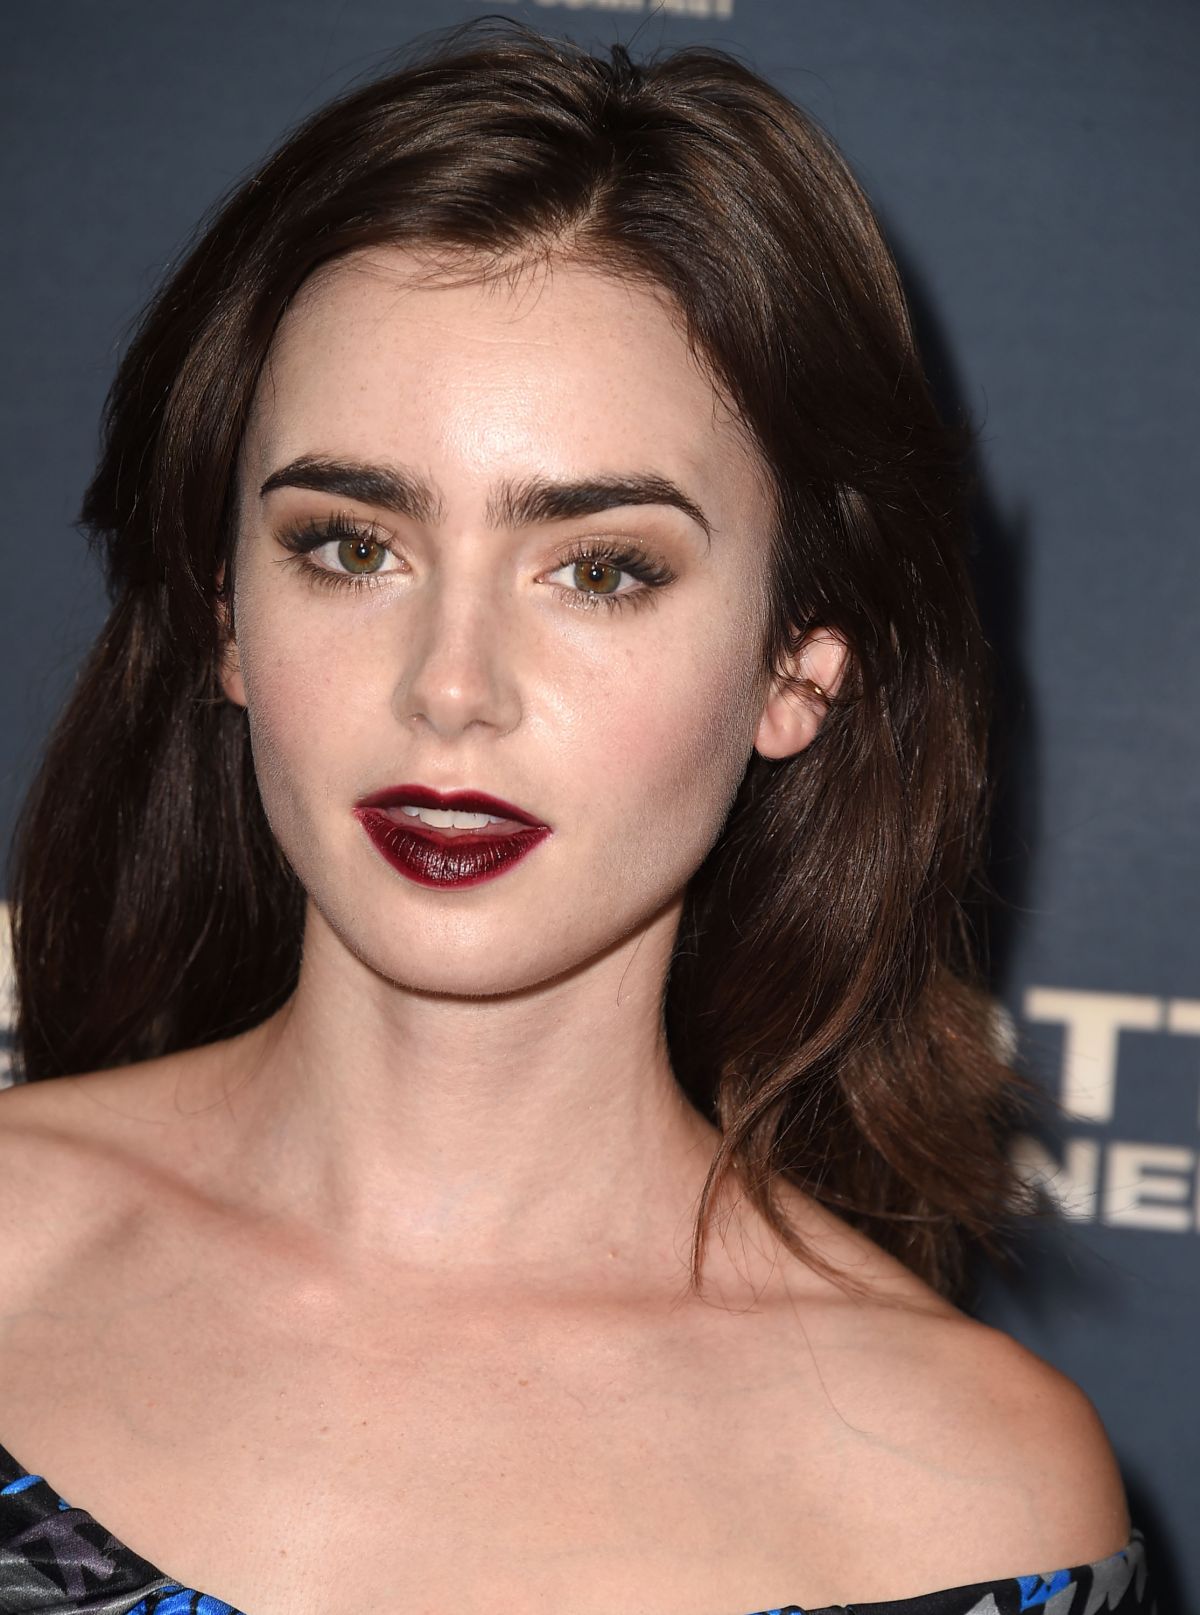 LILY COLLINS at Jeremy Scott: The People’s Designer Premiere in ...